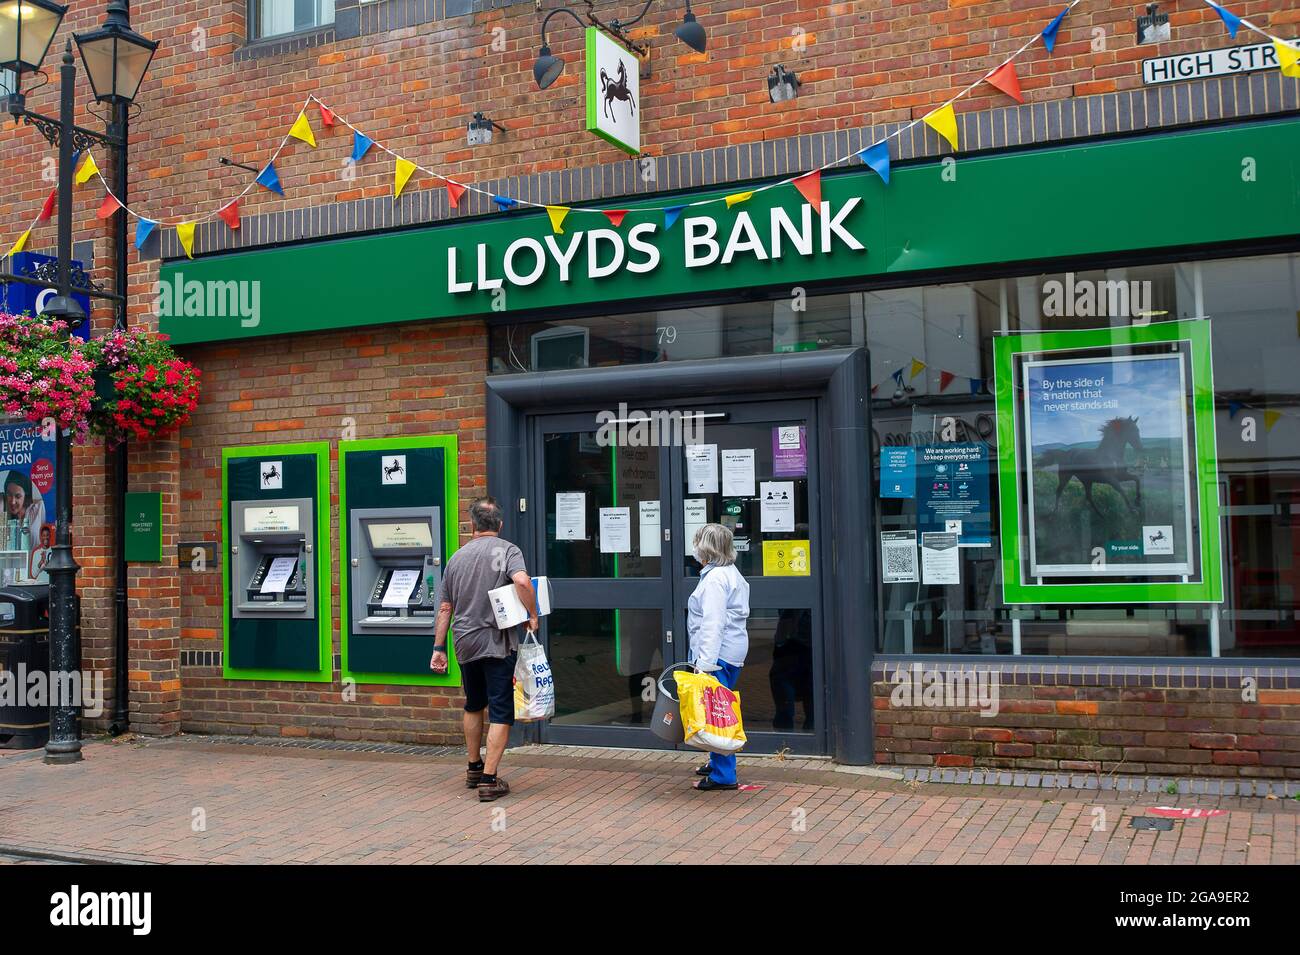 Chesham, Buckinghamshire, UK. 28th July, 2021. Customers frustrated that the Lloyds Bank had closed early today. Many businesses are having issues with staffing as their employees are having to self isolate due to the Covid-19 NHS Test and Trace app having pinged them. Credit: Maureen McLean/Alamy Stock Photo